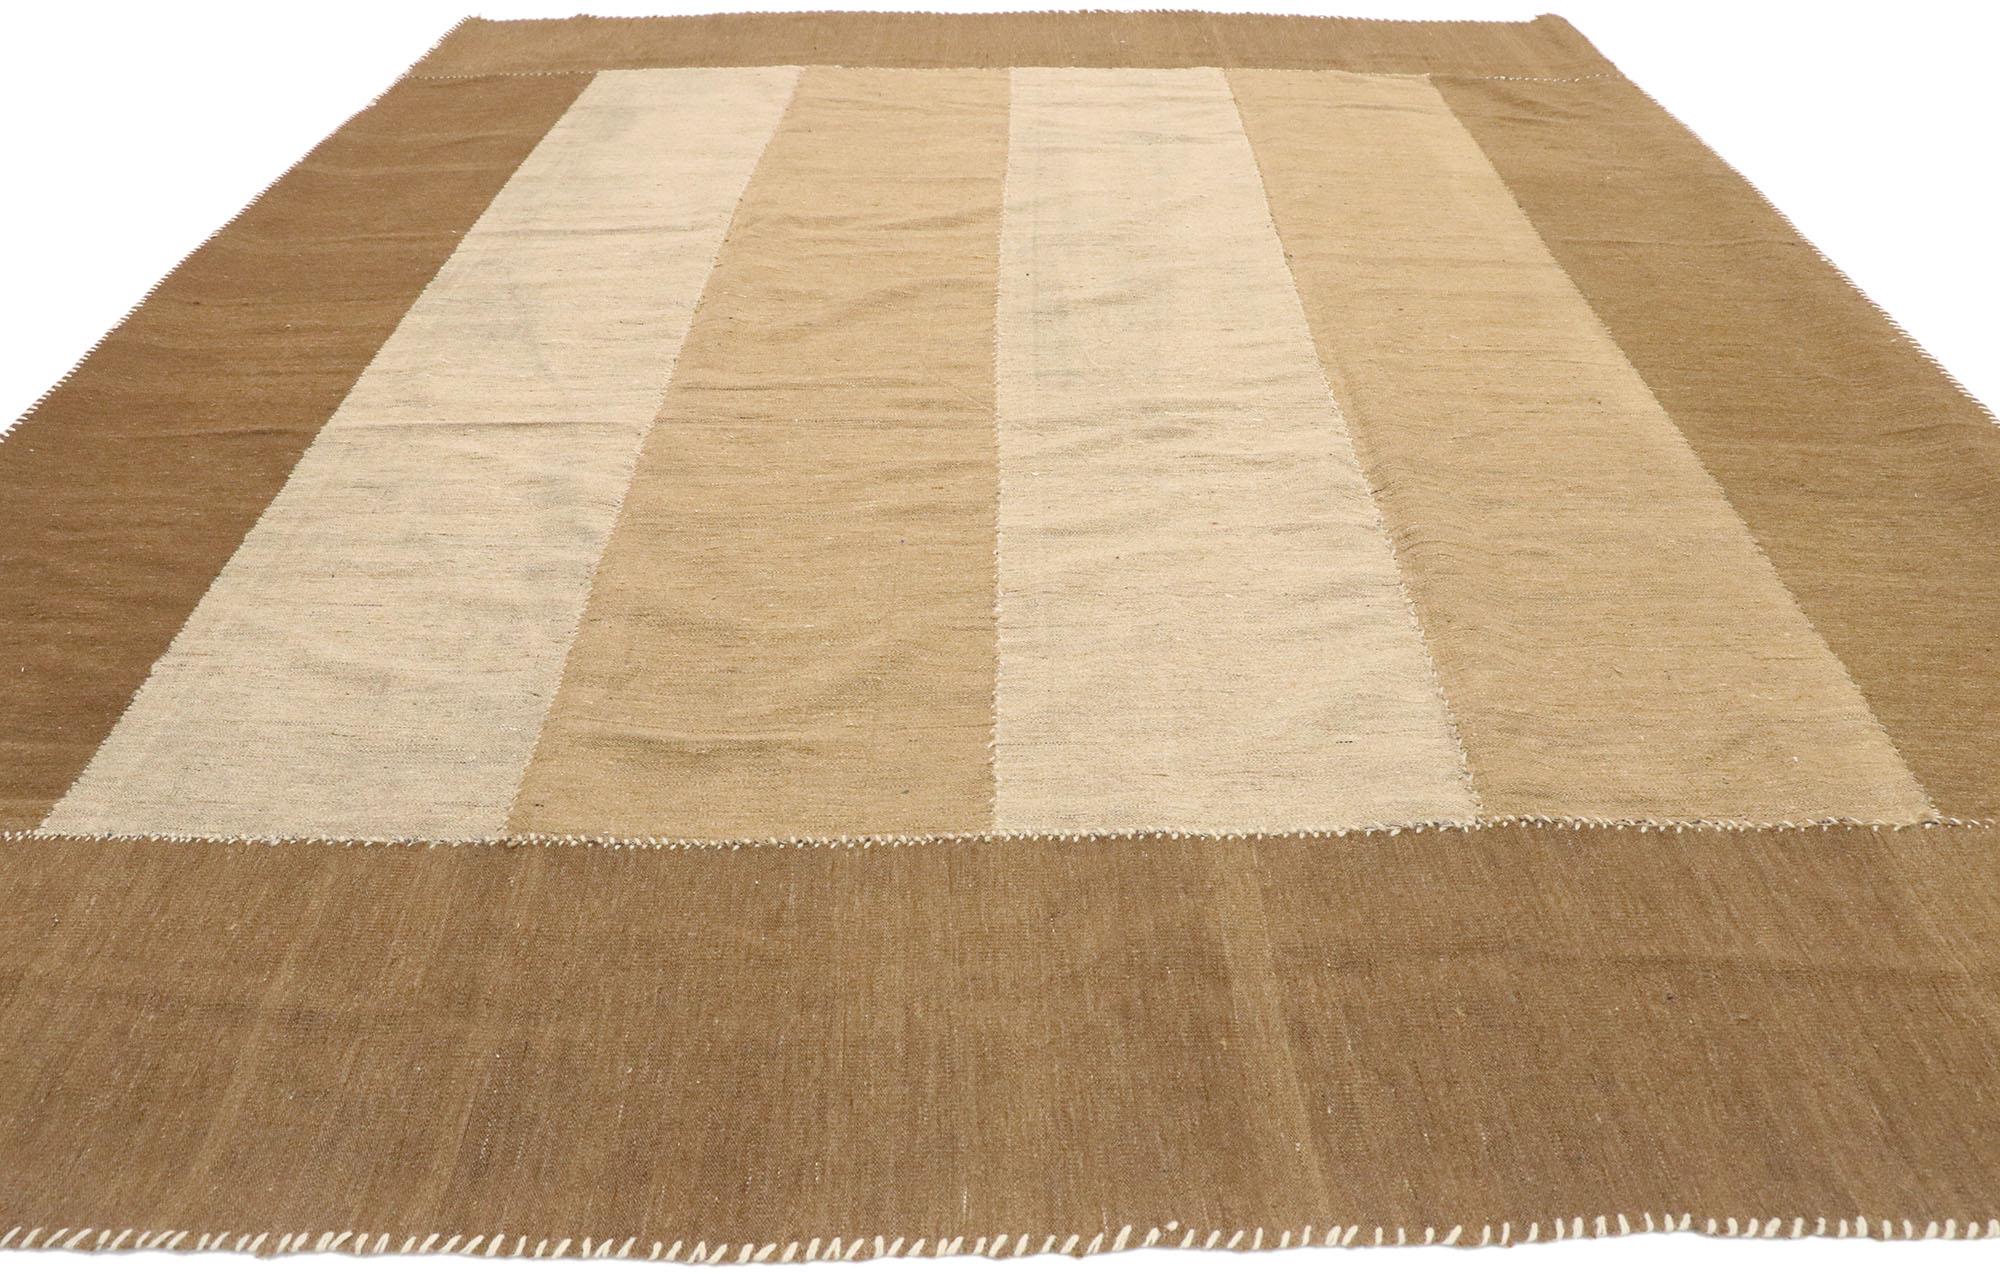 Hand-Woven Vintage Persian Kilim Area Rug with Midcentury Organic Modern Style For Sale